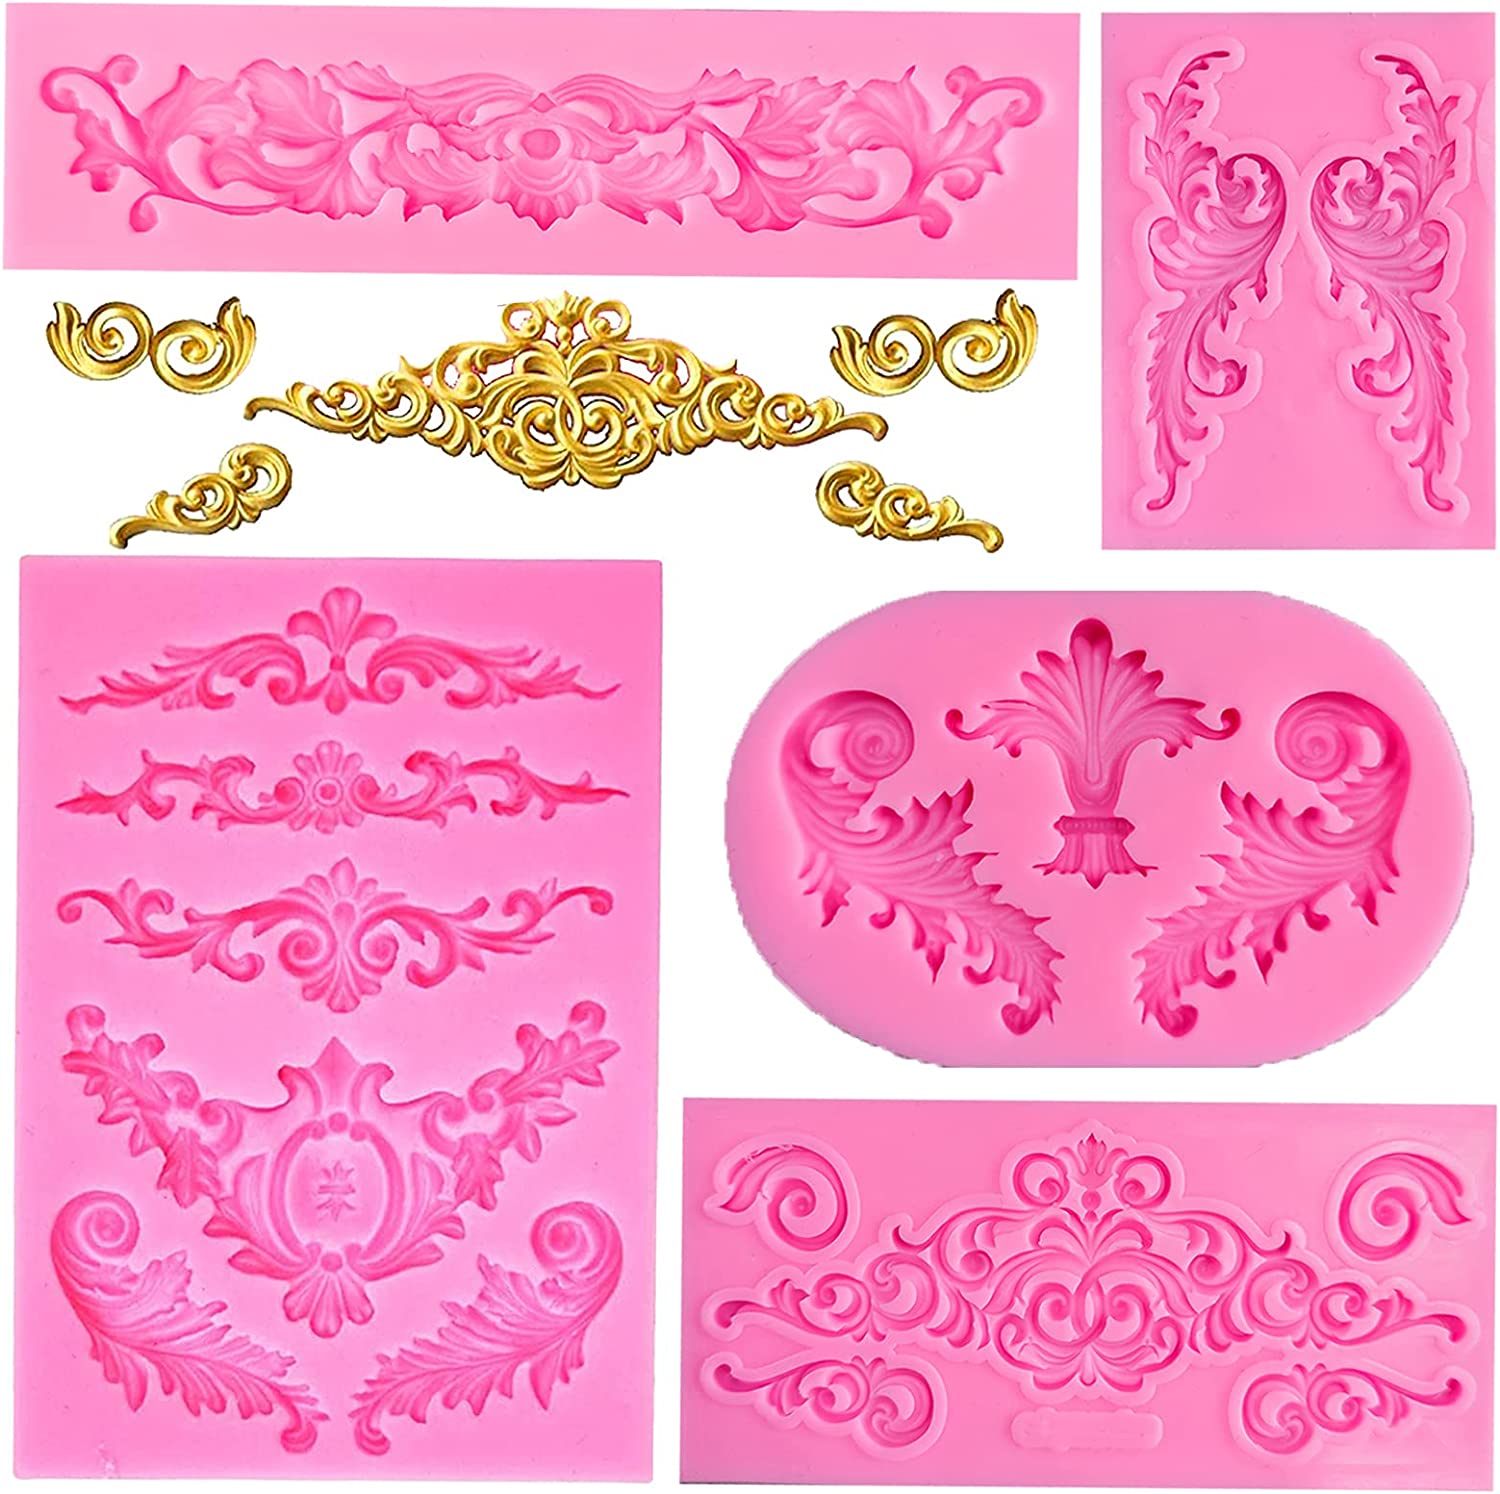 Rainmae 5 Pcs Baroque Style Curlicues Scroll Lace Fondant Silicone Mold -  - Cupcake Topper